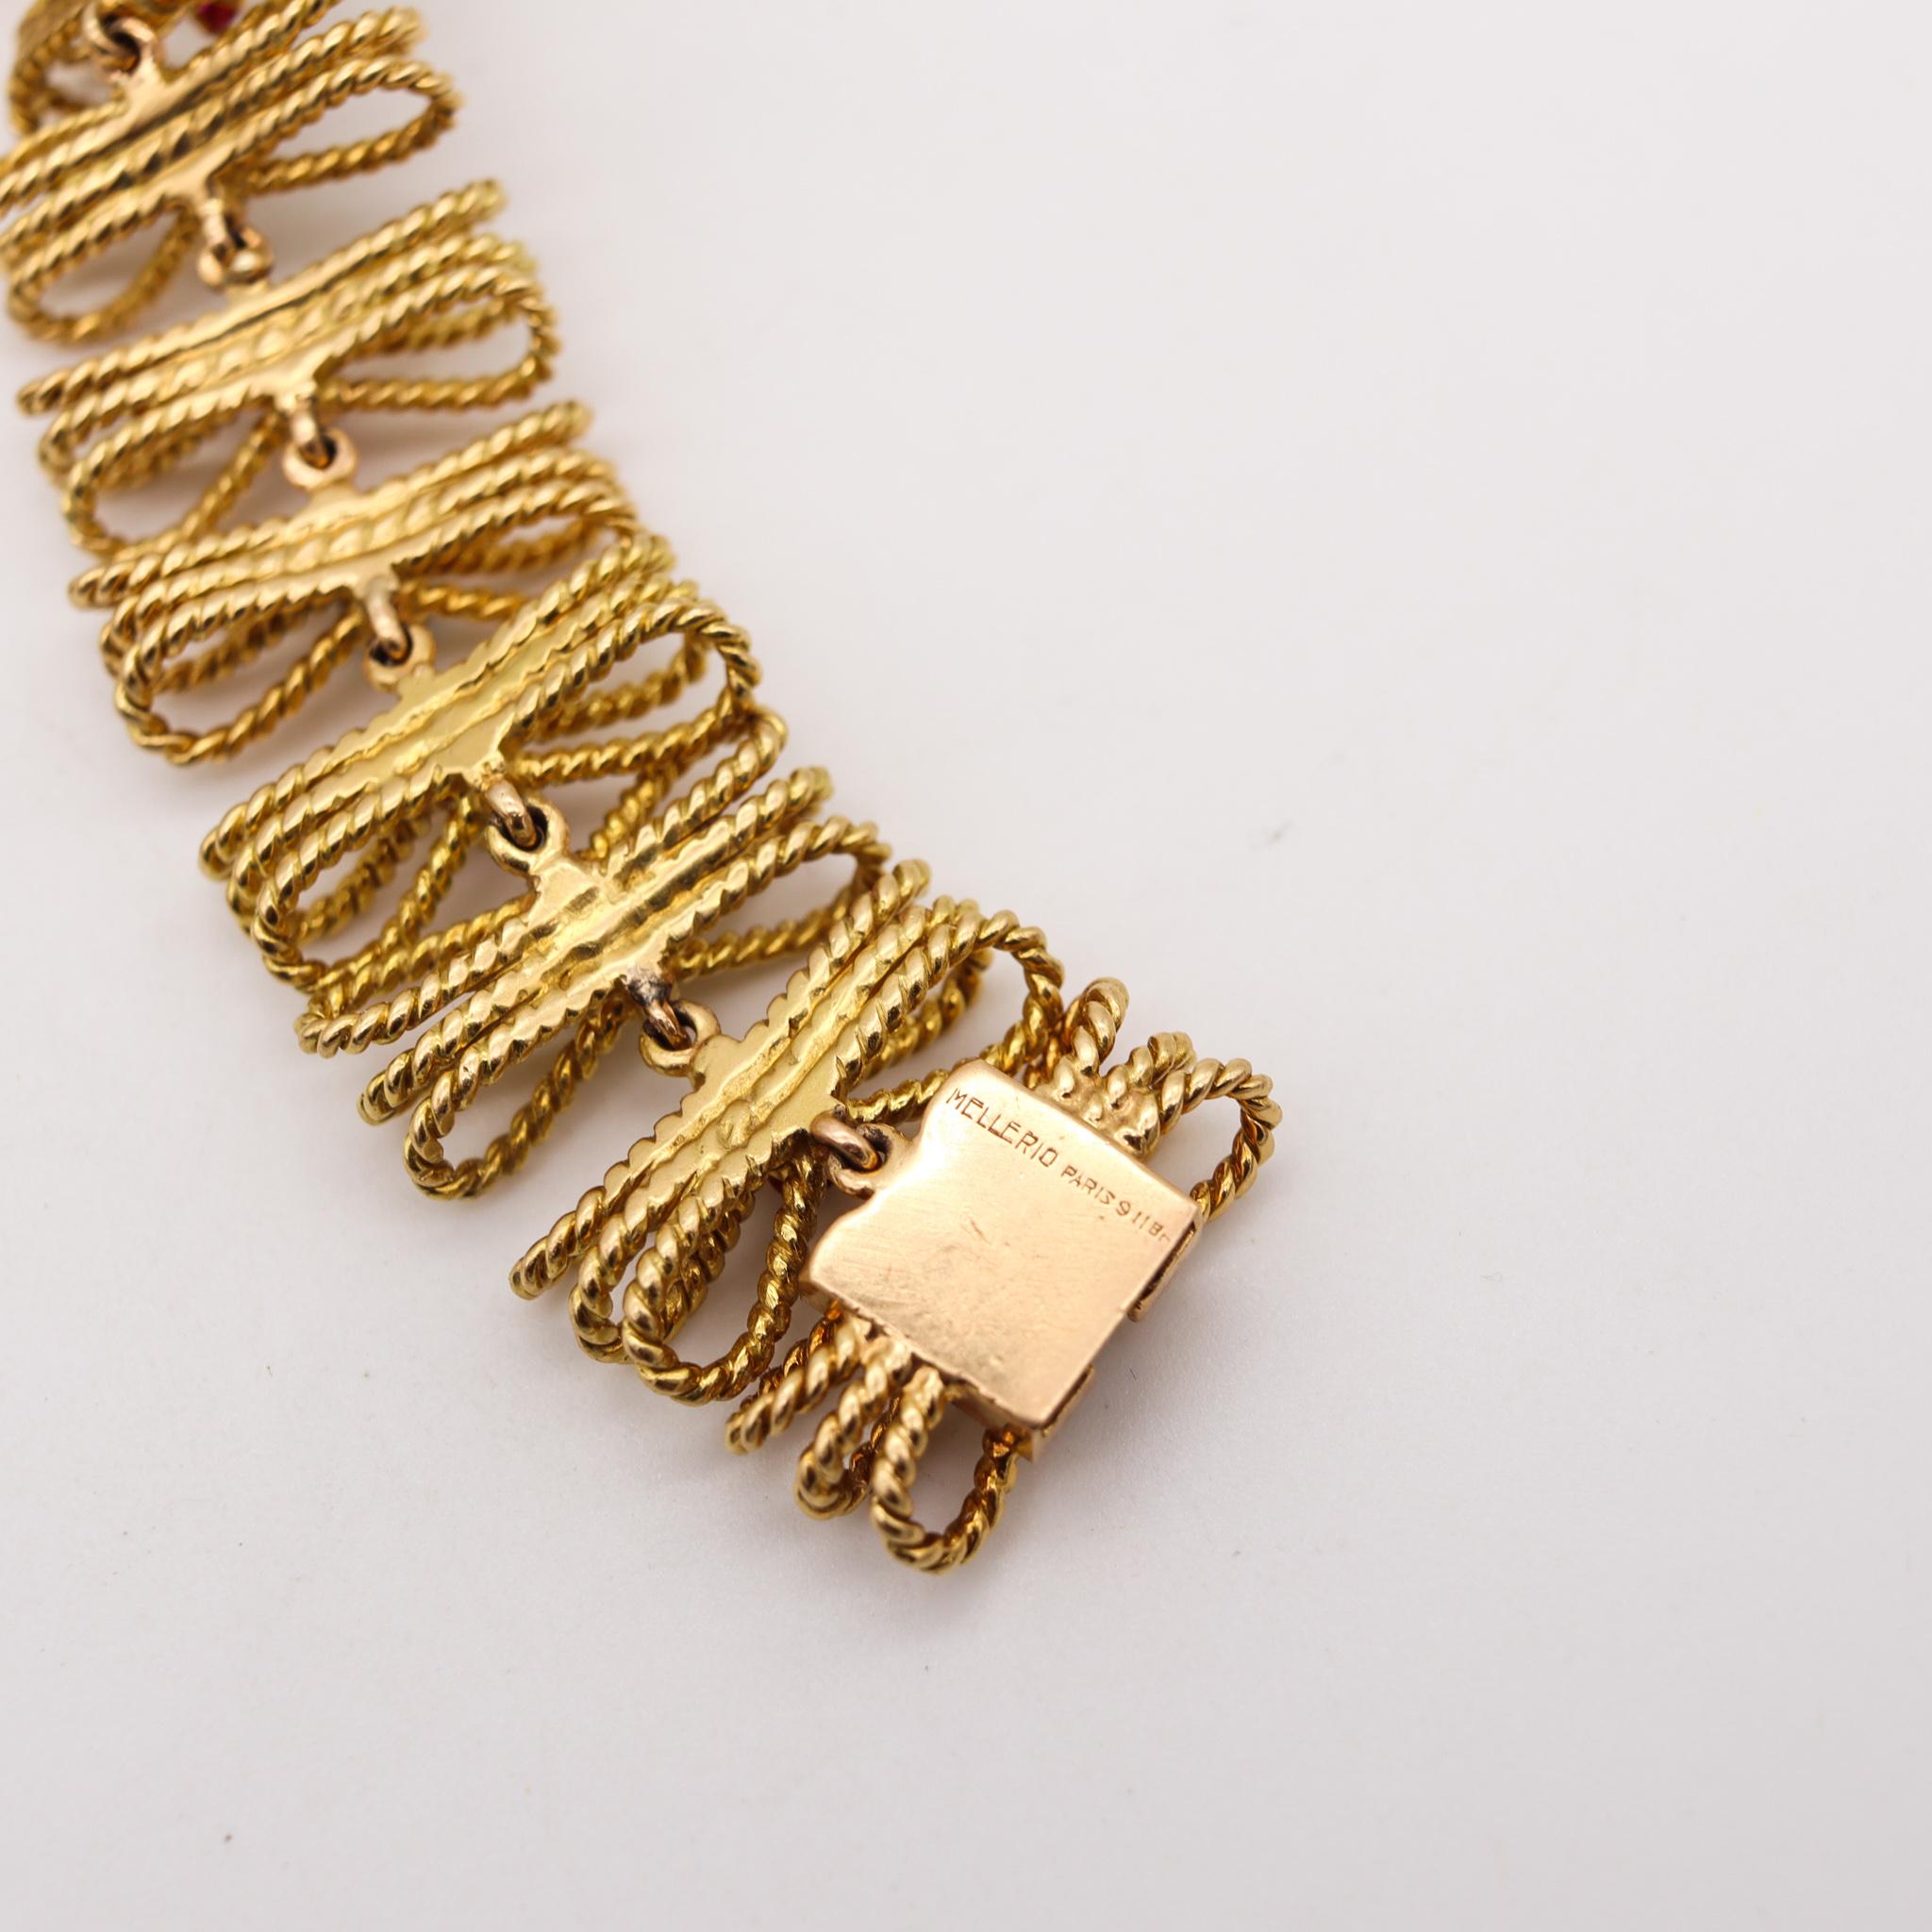 Mellerio-Dits Meller 1950 Paris Twisted Bracelet in 18kt Gold with 2.55ctw Gems In Excellent Condition For Sale In Miami, FL